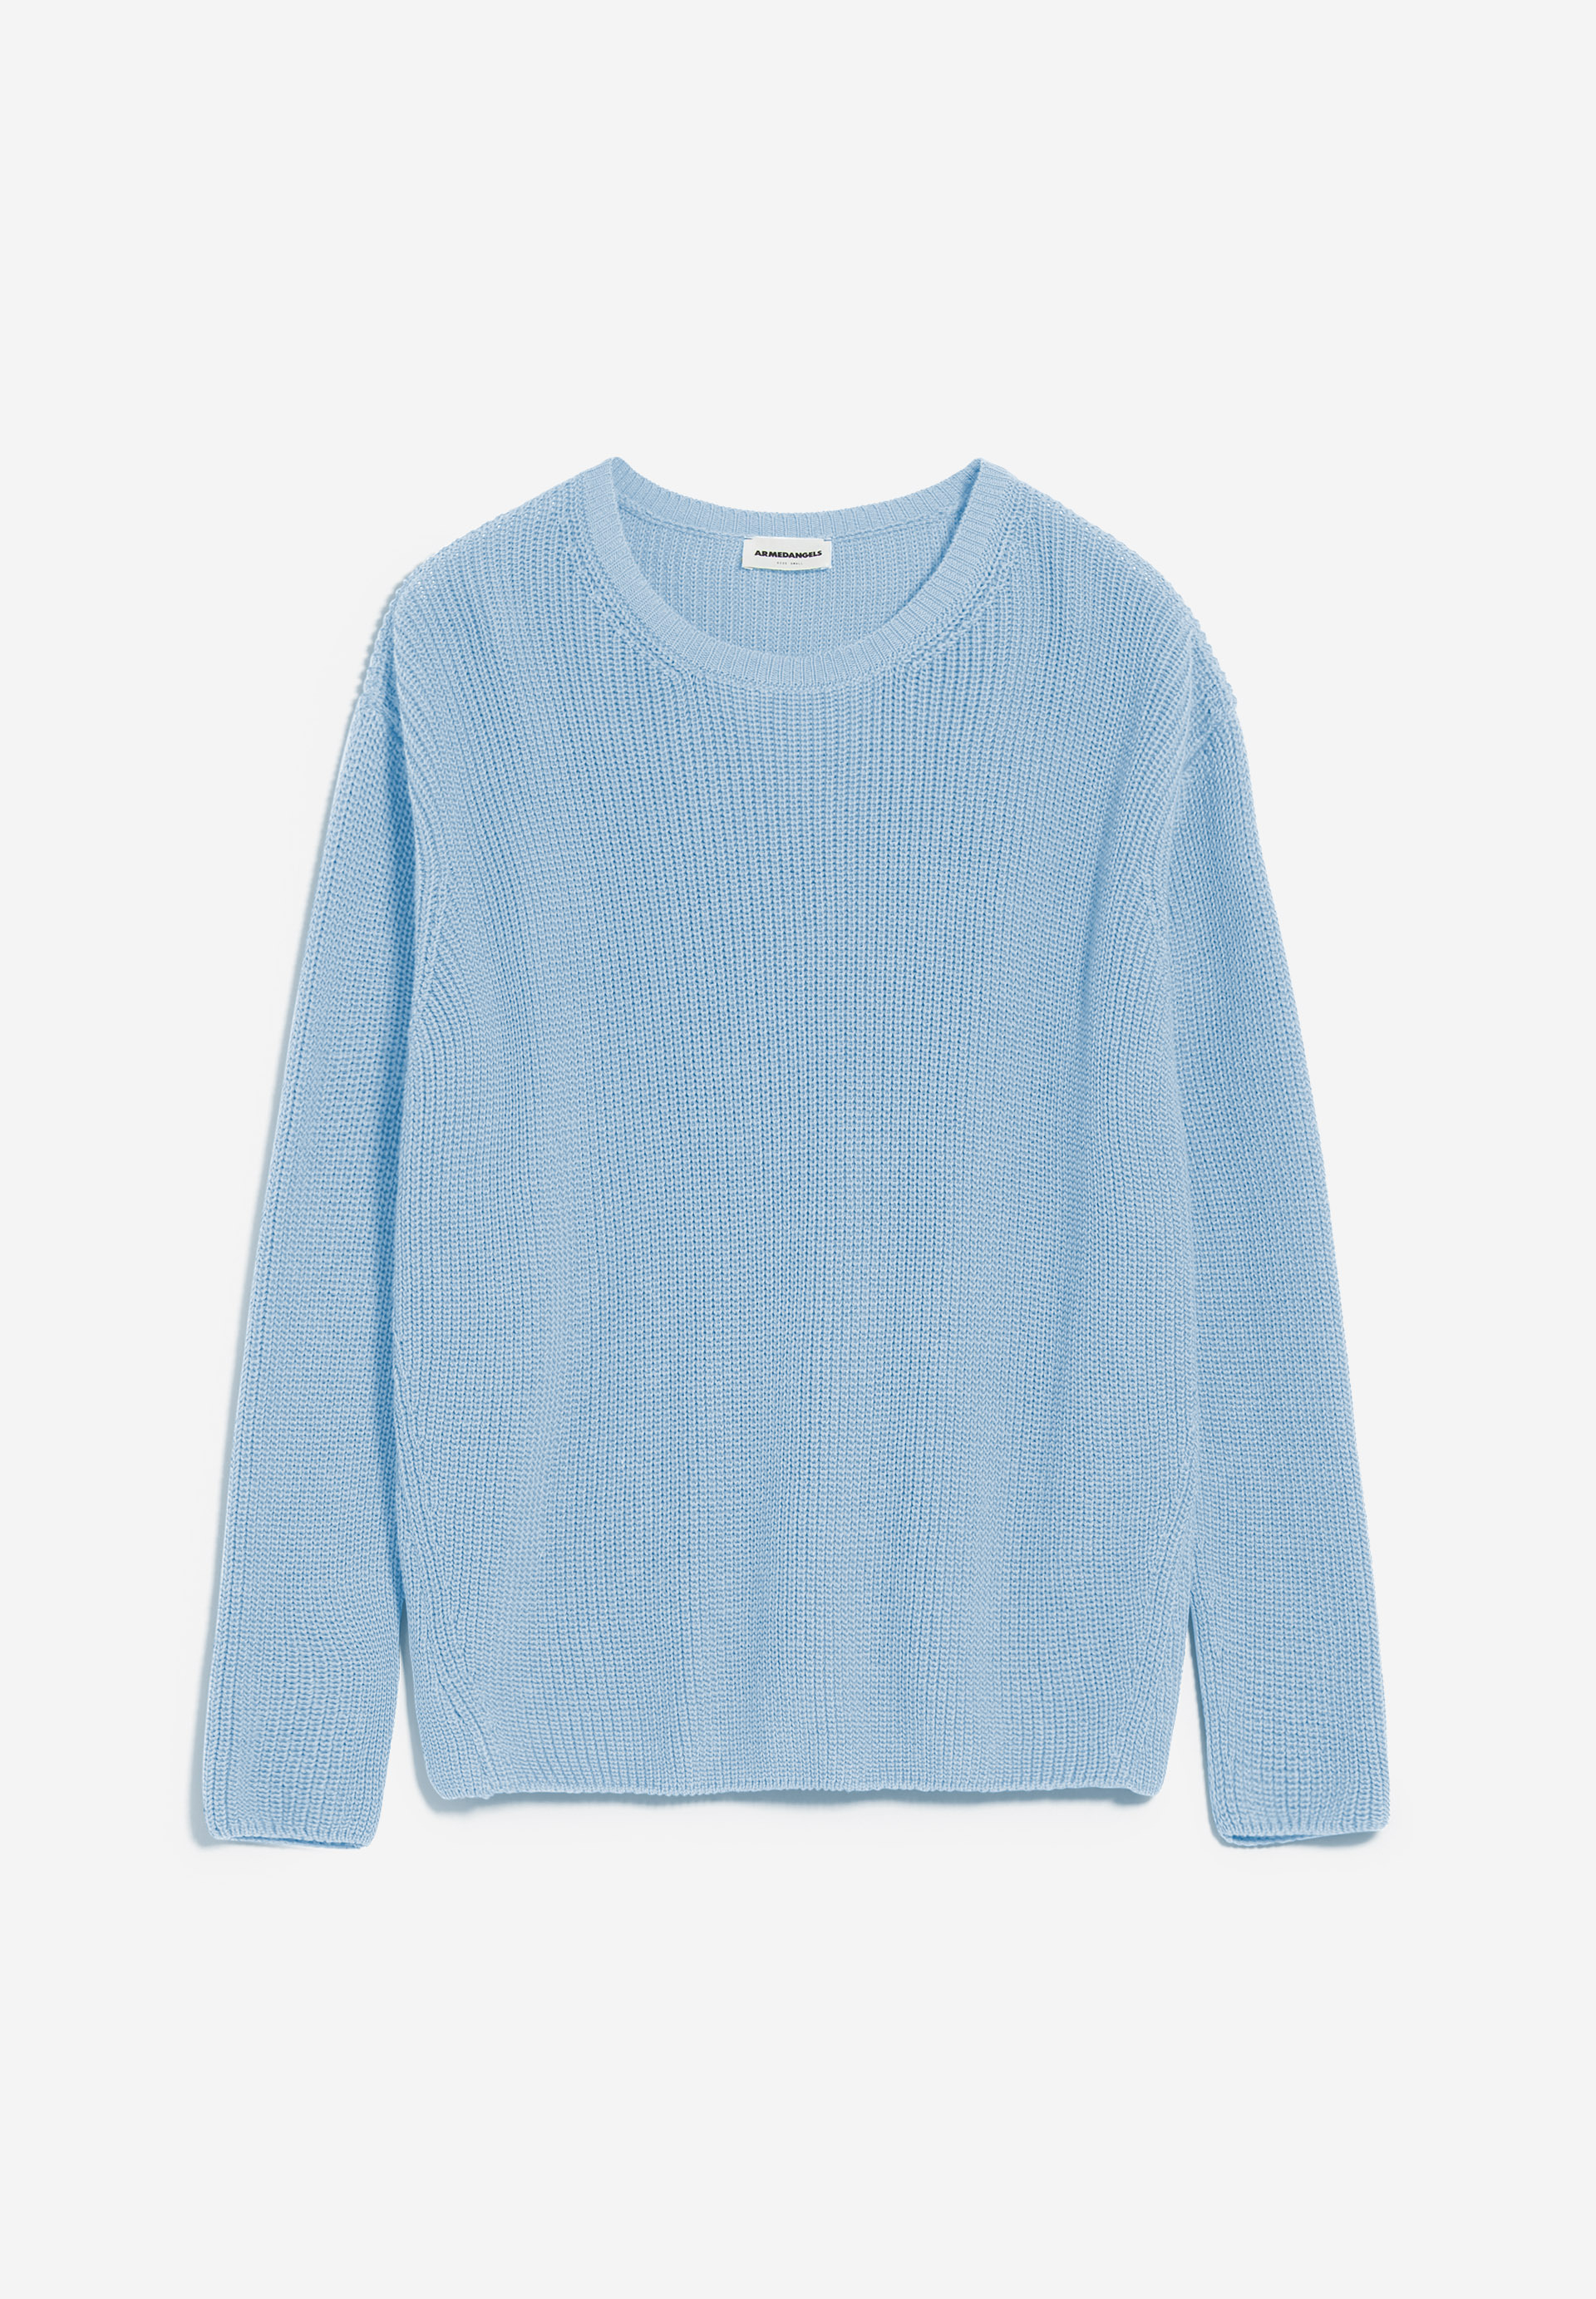 NURIELLAA Knit Sweater Oversized Fit made of Organic Cotton